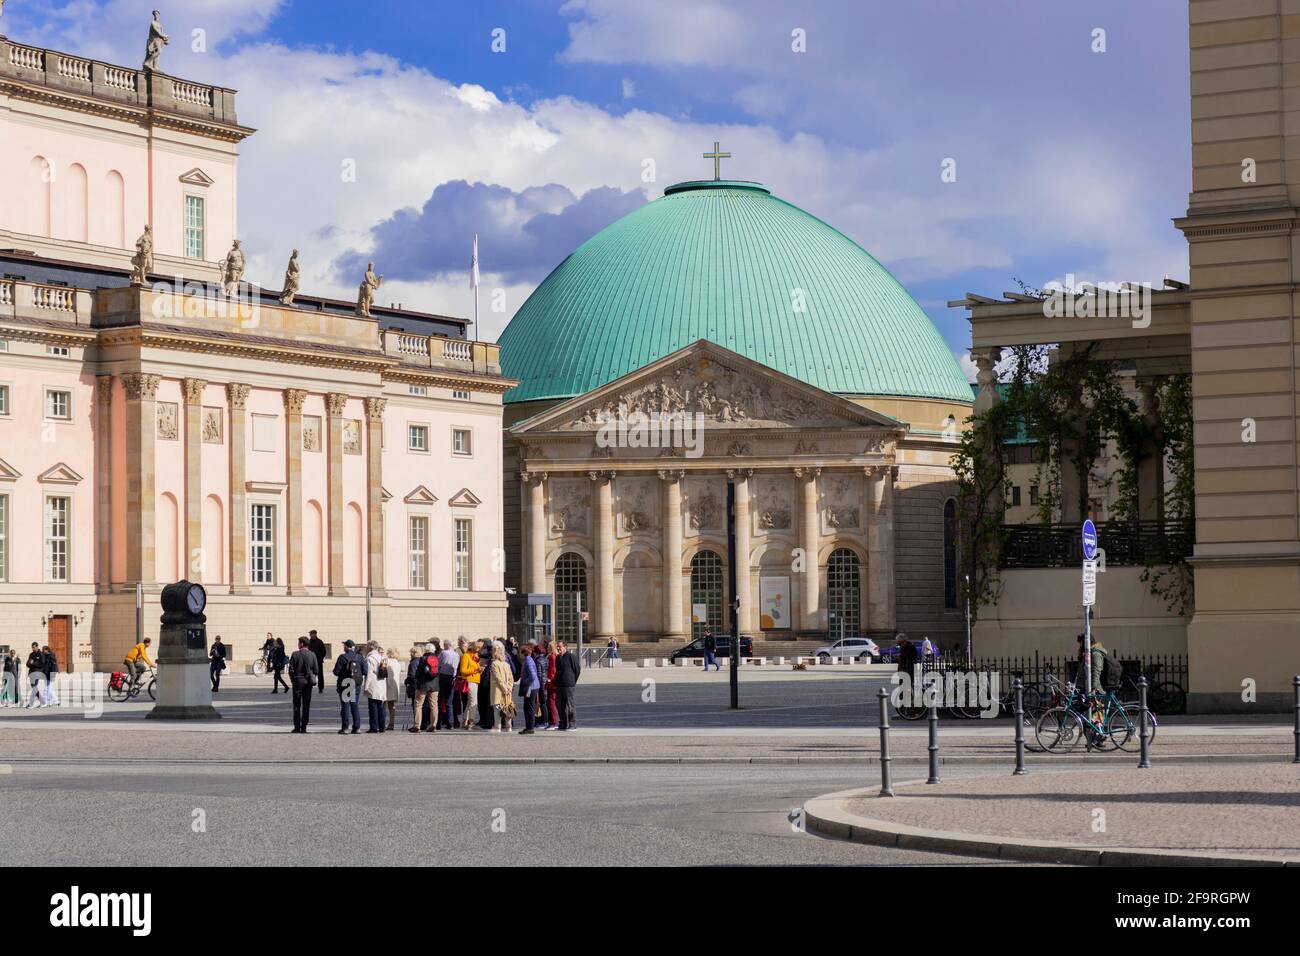 13 May 2019 Berlin, Germany - Group of tourists, St. Hedwig's Cathedral or Sankt Hedwigs Kathedrale, Roman Catholic cathedral, Bebelplatz. Stock Photo